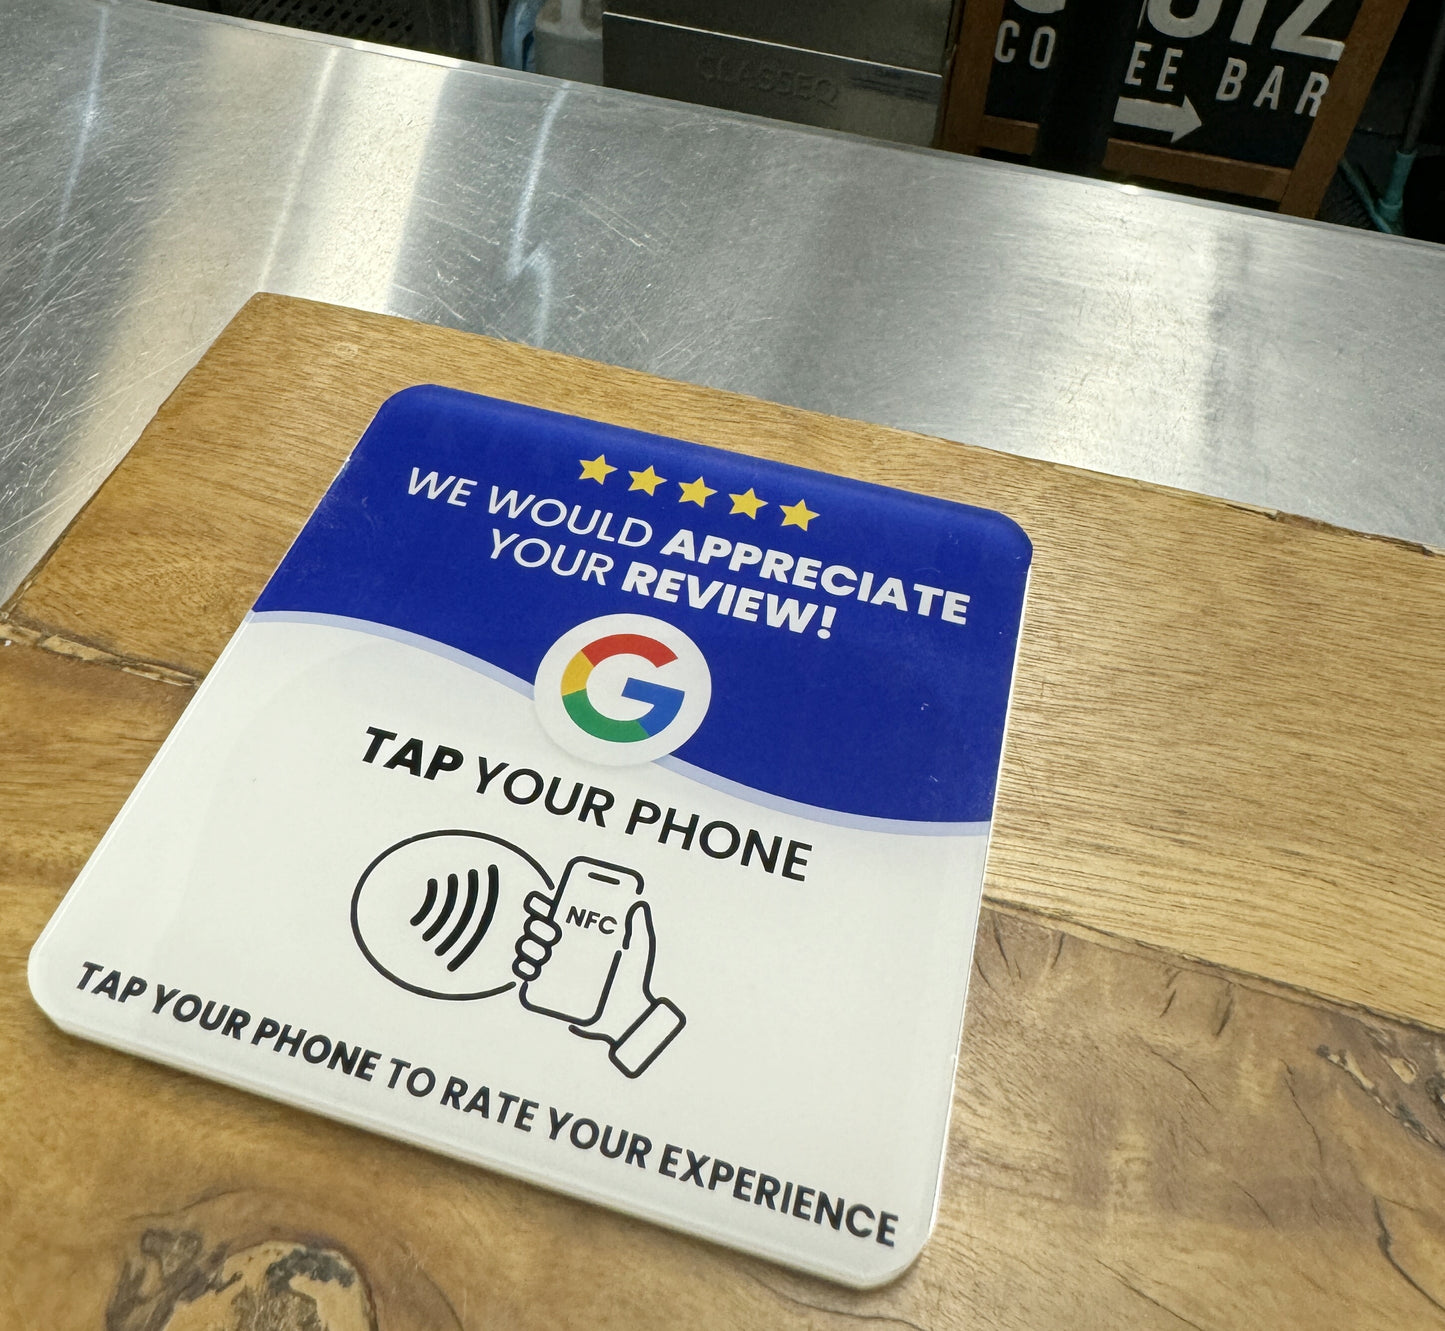 ReviewBoost NFC Plaque on a Cafes Counter for Google Reviews